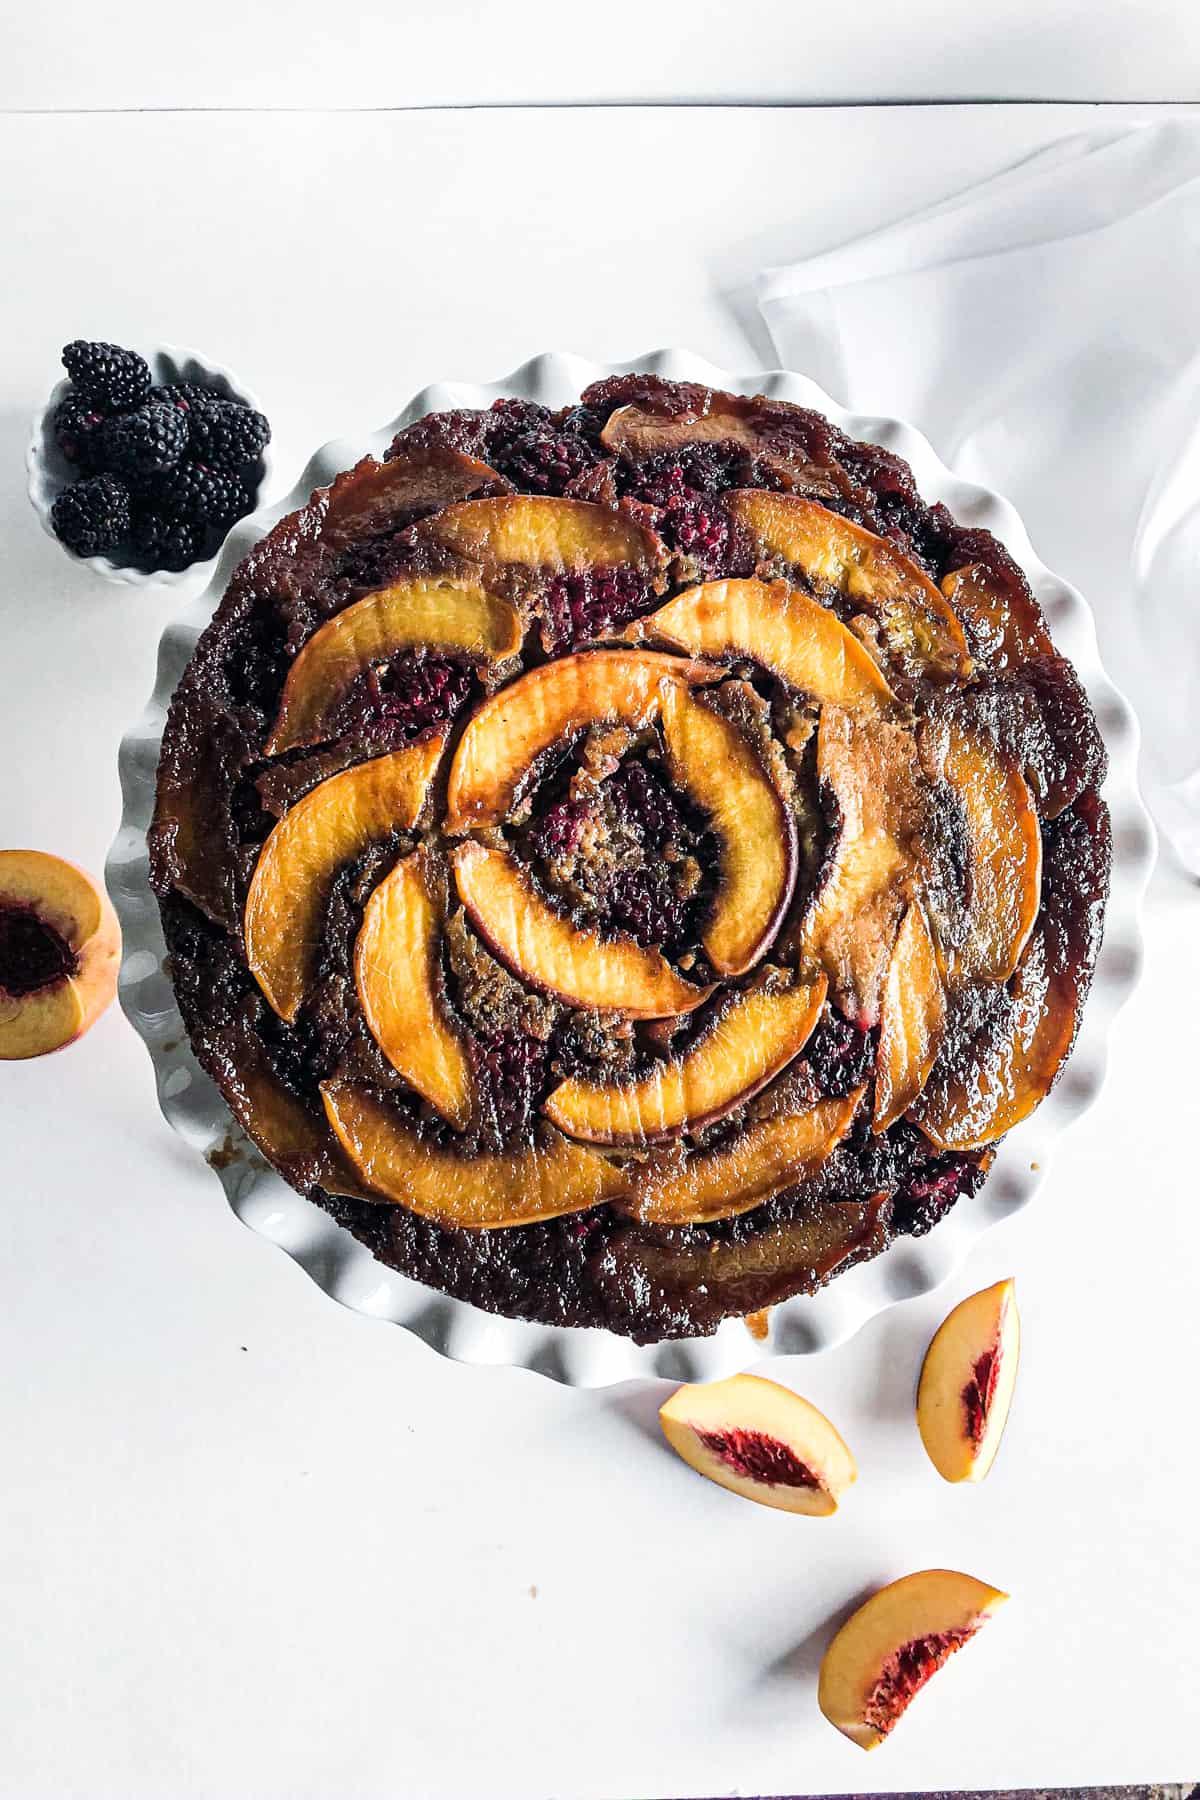 Peach blackberry upside down cake from the top.